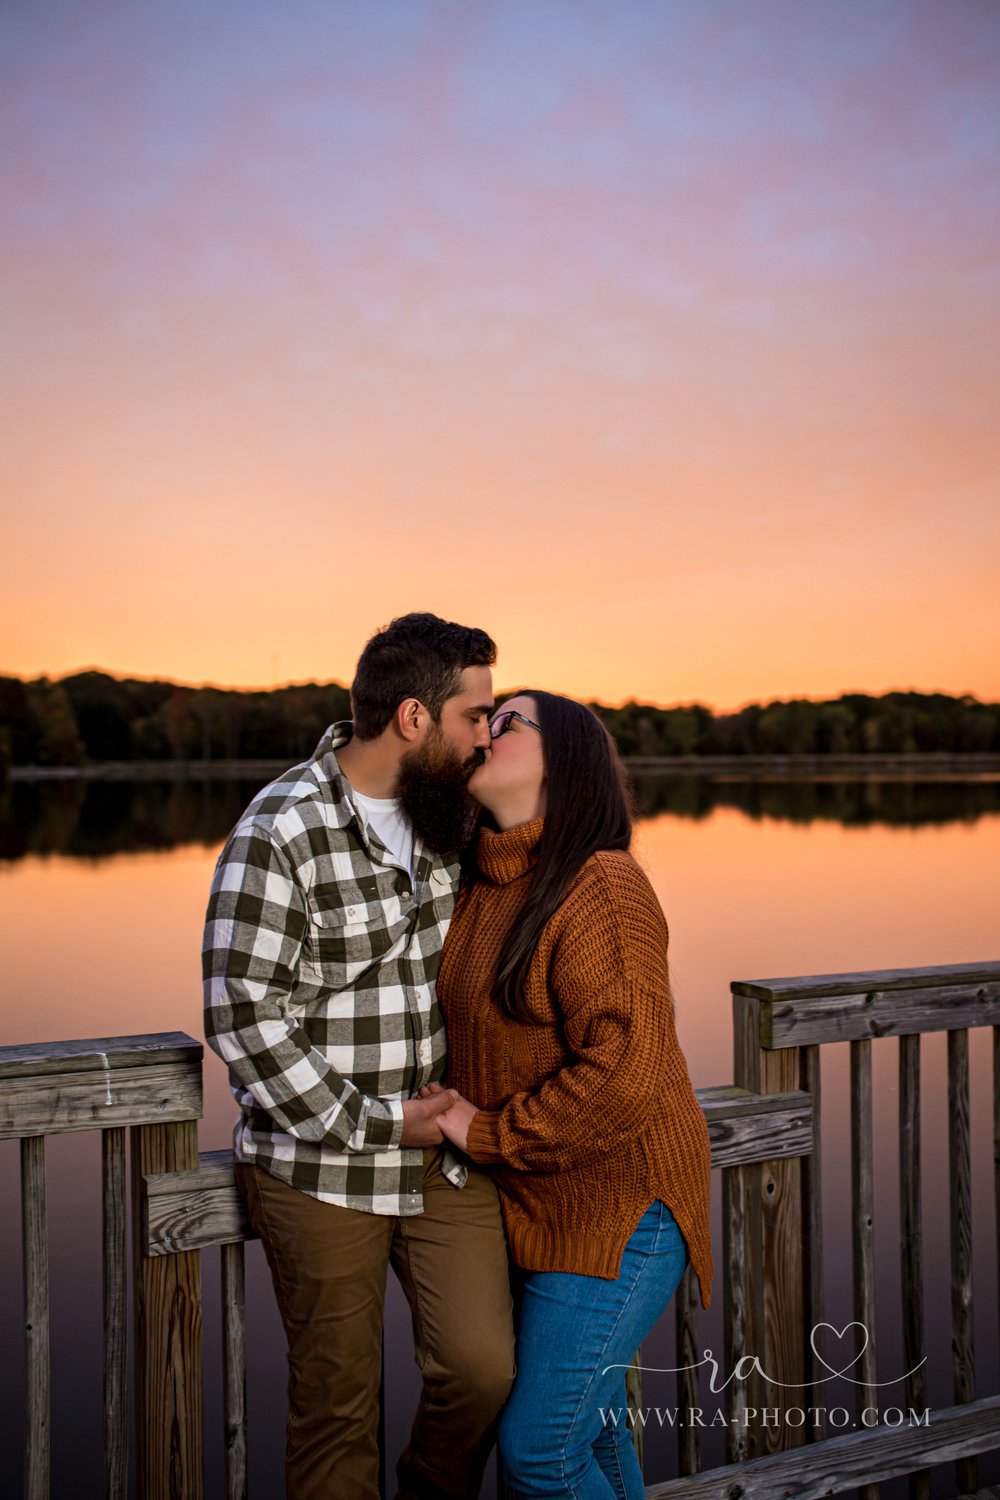 045-MGS-FALLS-CREEK-PA-ENGAGEMENT-PICTURES.jpg